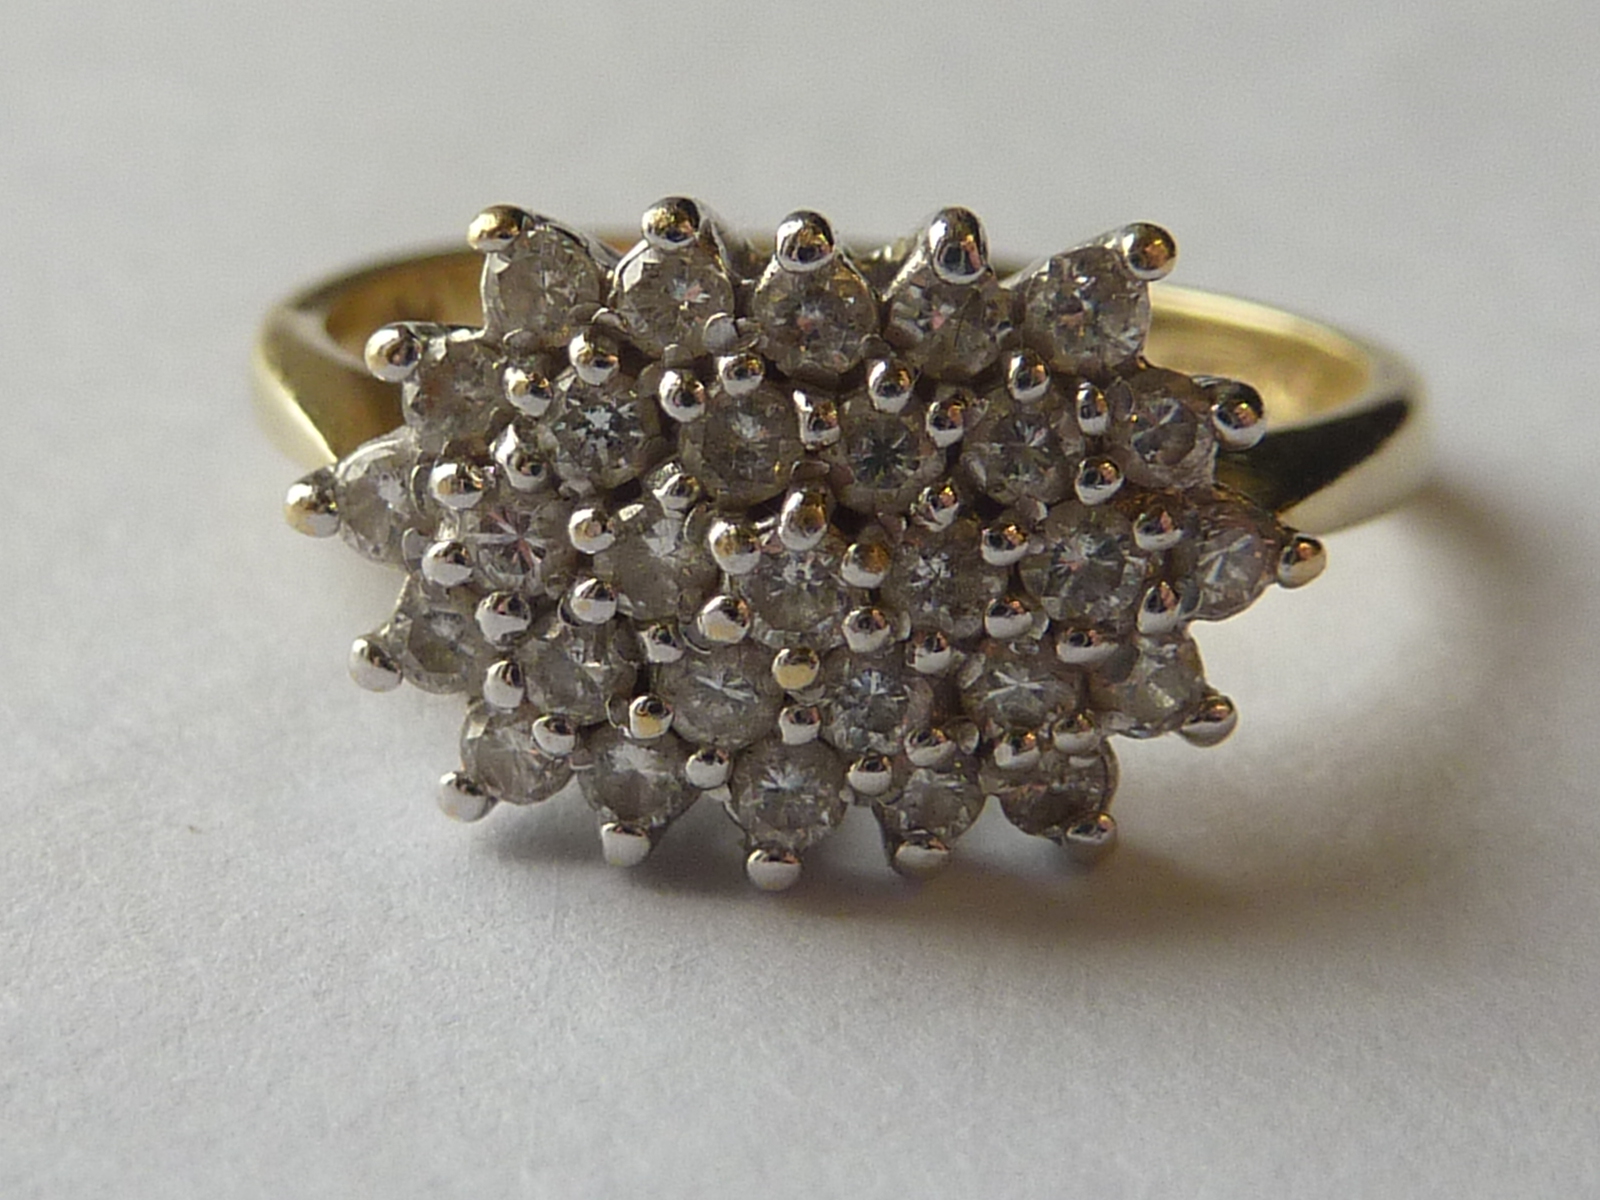 Diamond multi-gem cluster ring with small brilliants, in 18ct gold.